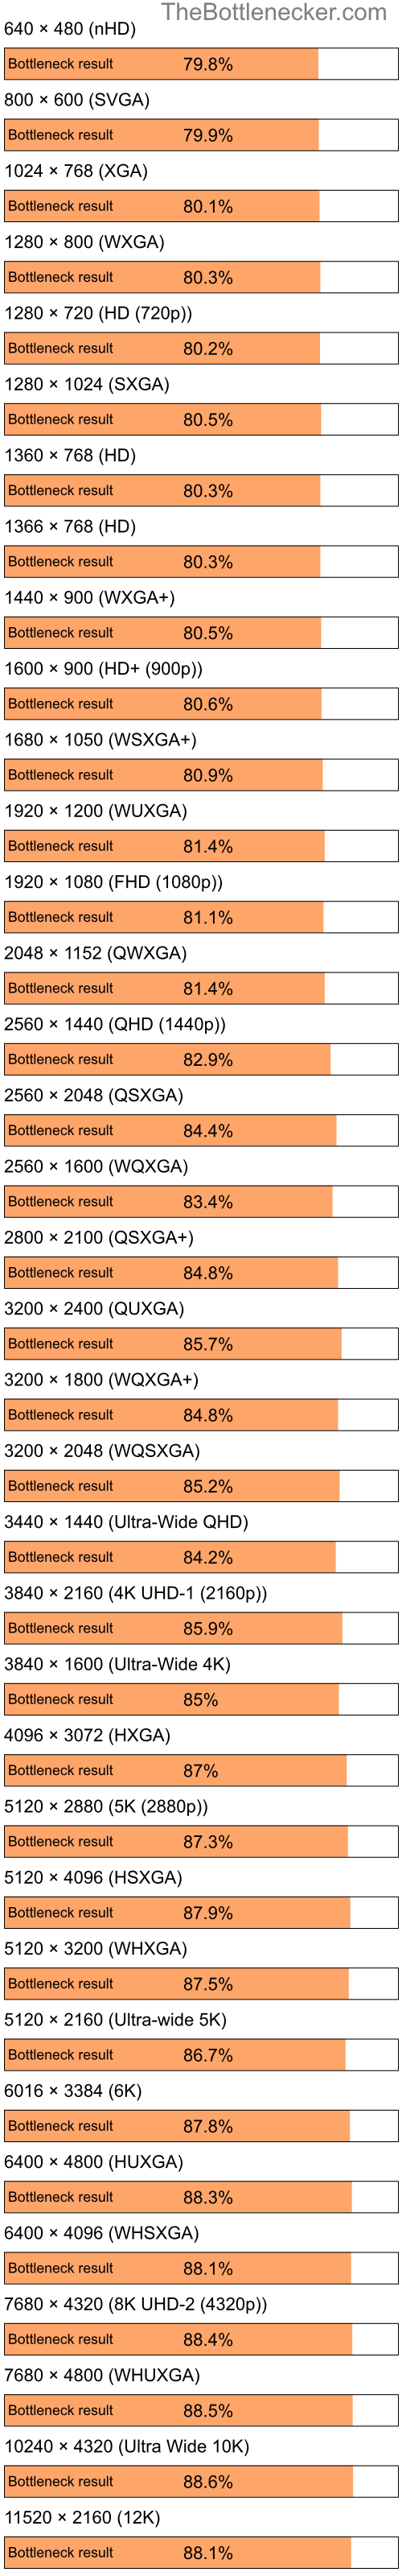 Bottleneck results by resolution for Intel Celeron M 420 and AMD Radeon 9500 PRO in Graphic Card Intense Tasks